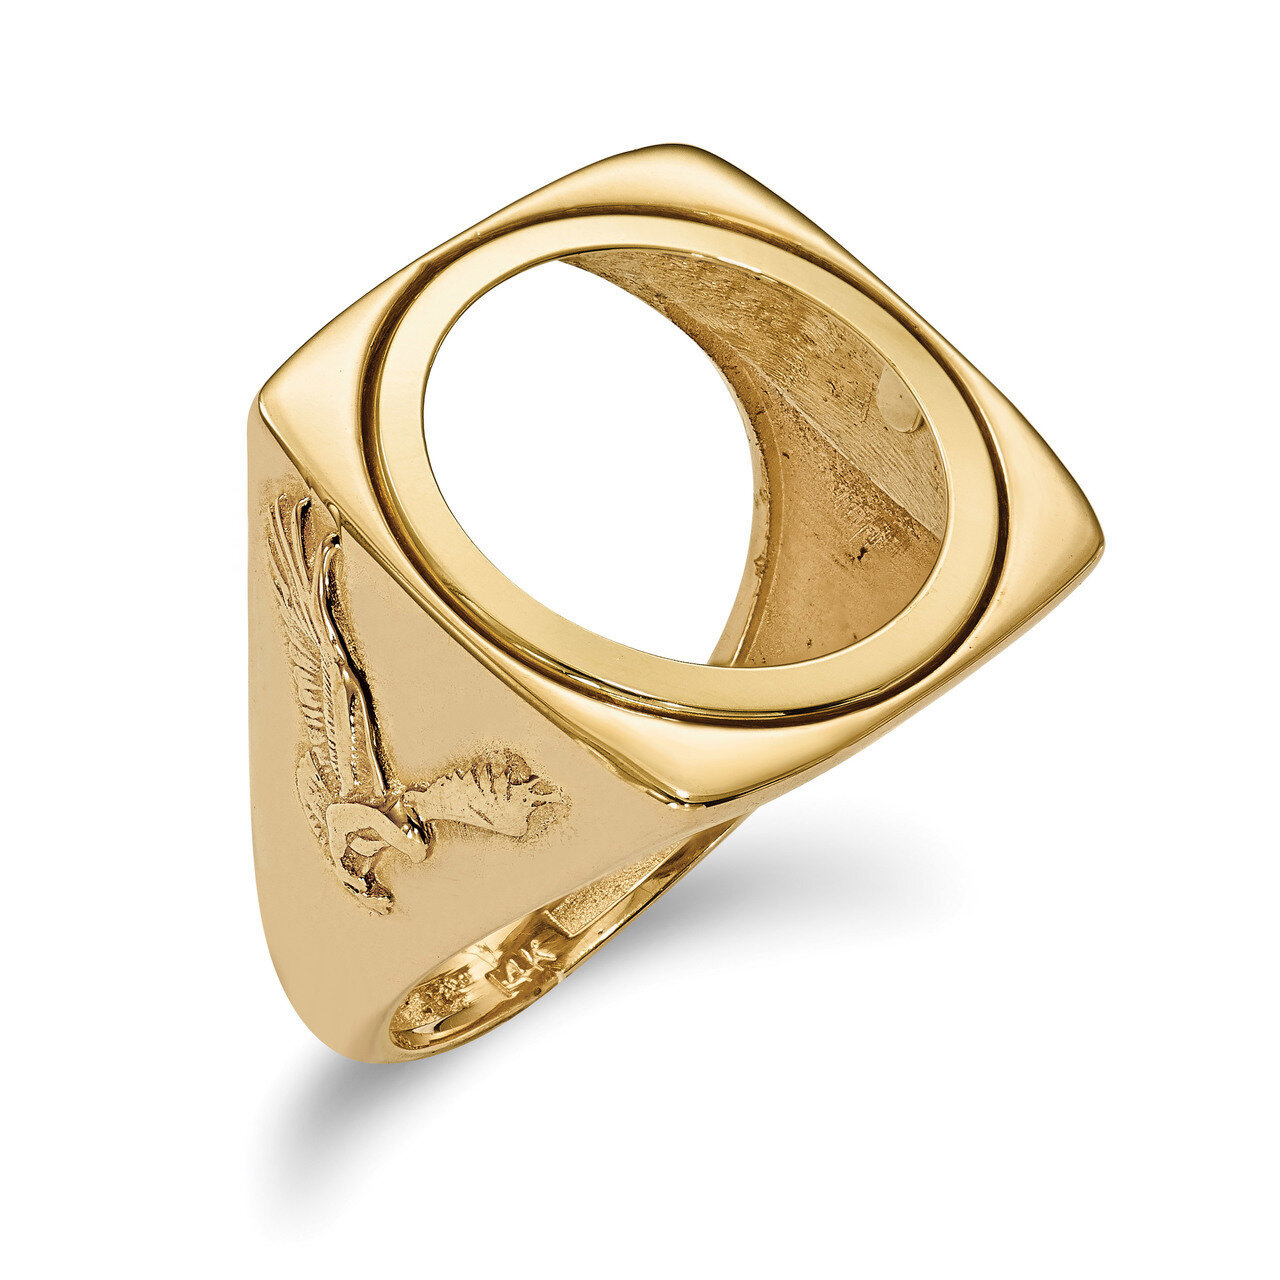 1/10AE Polished Coin Ring 14k Gold CR8/10AE